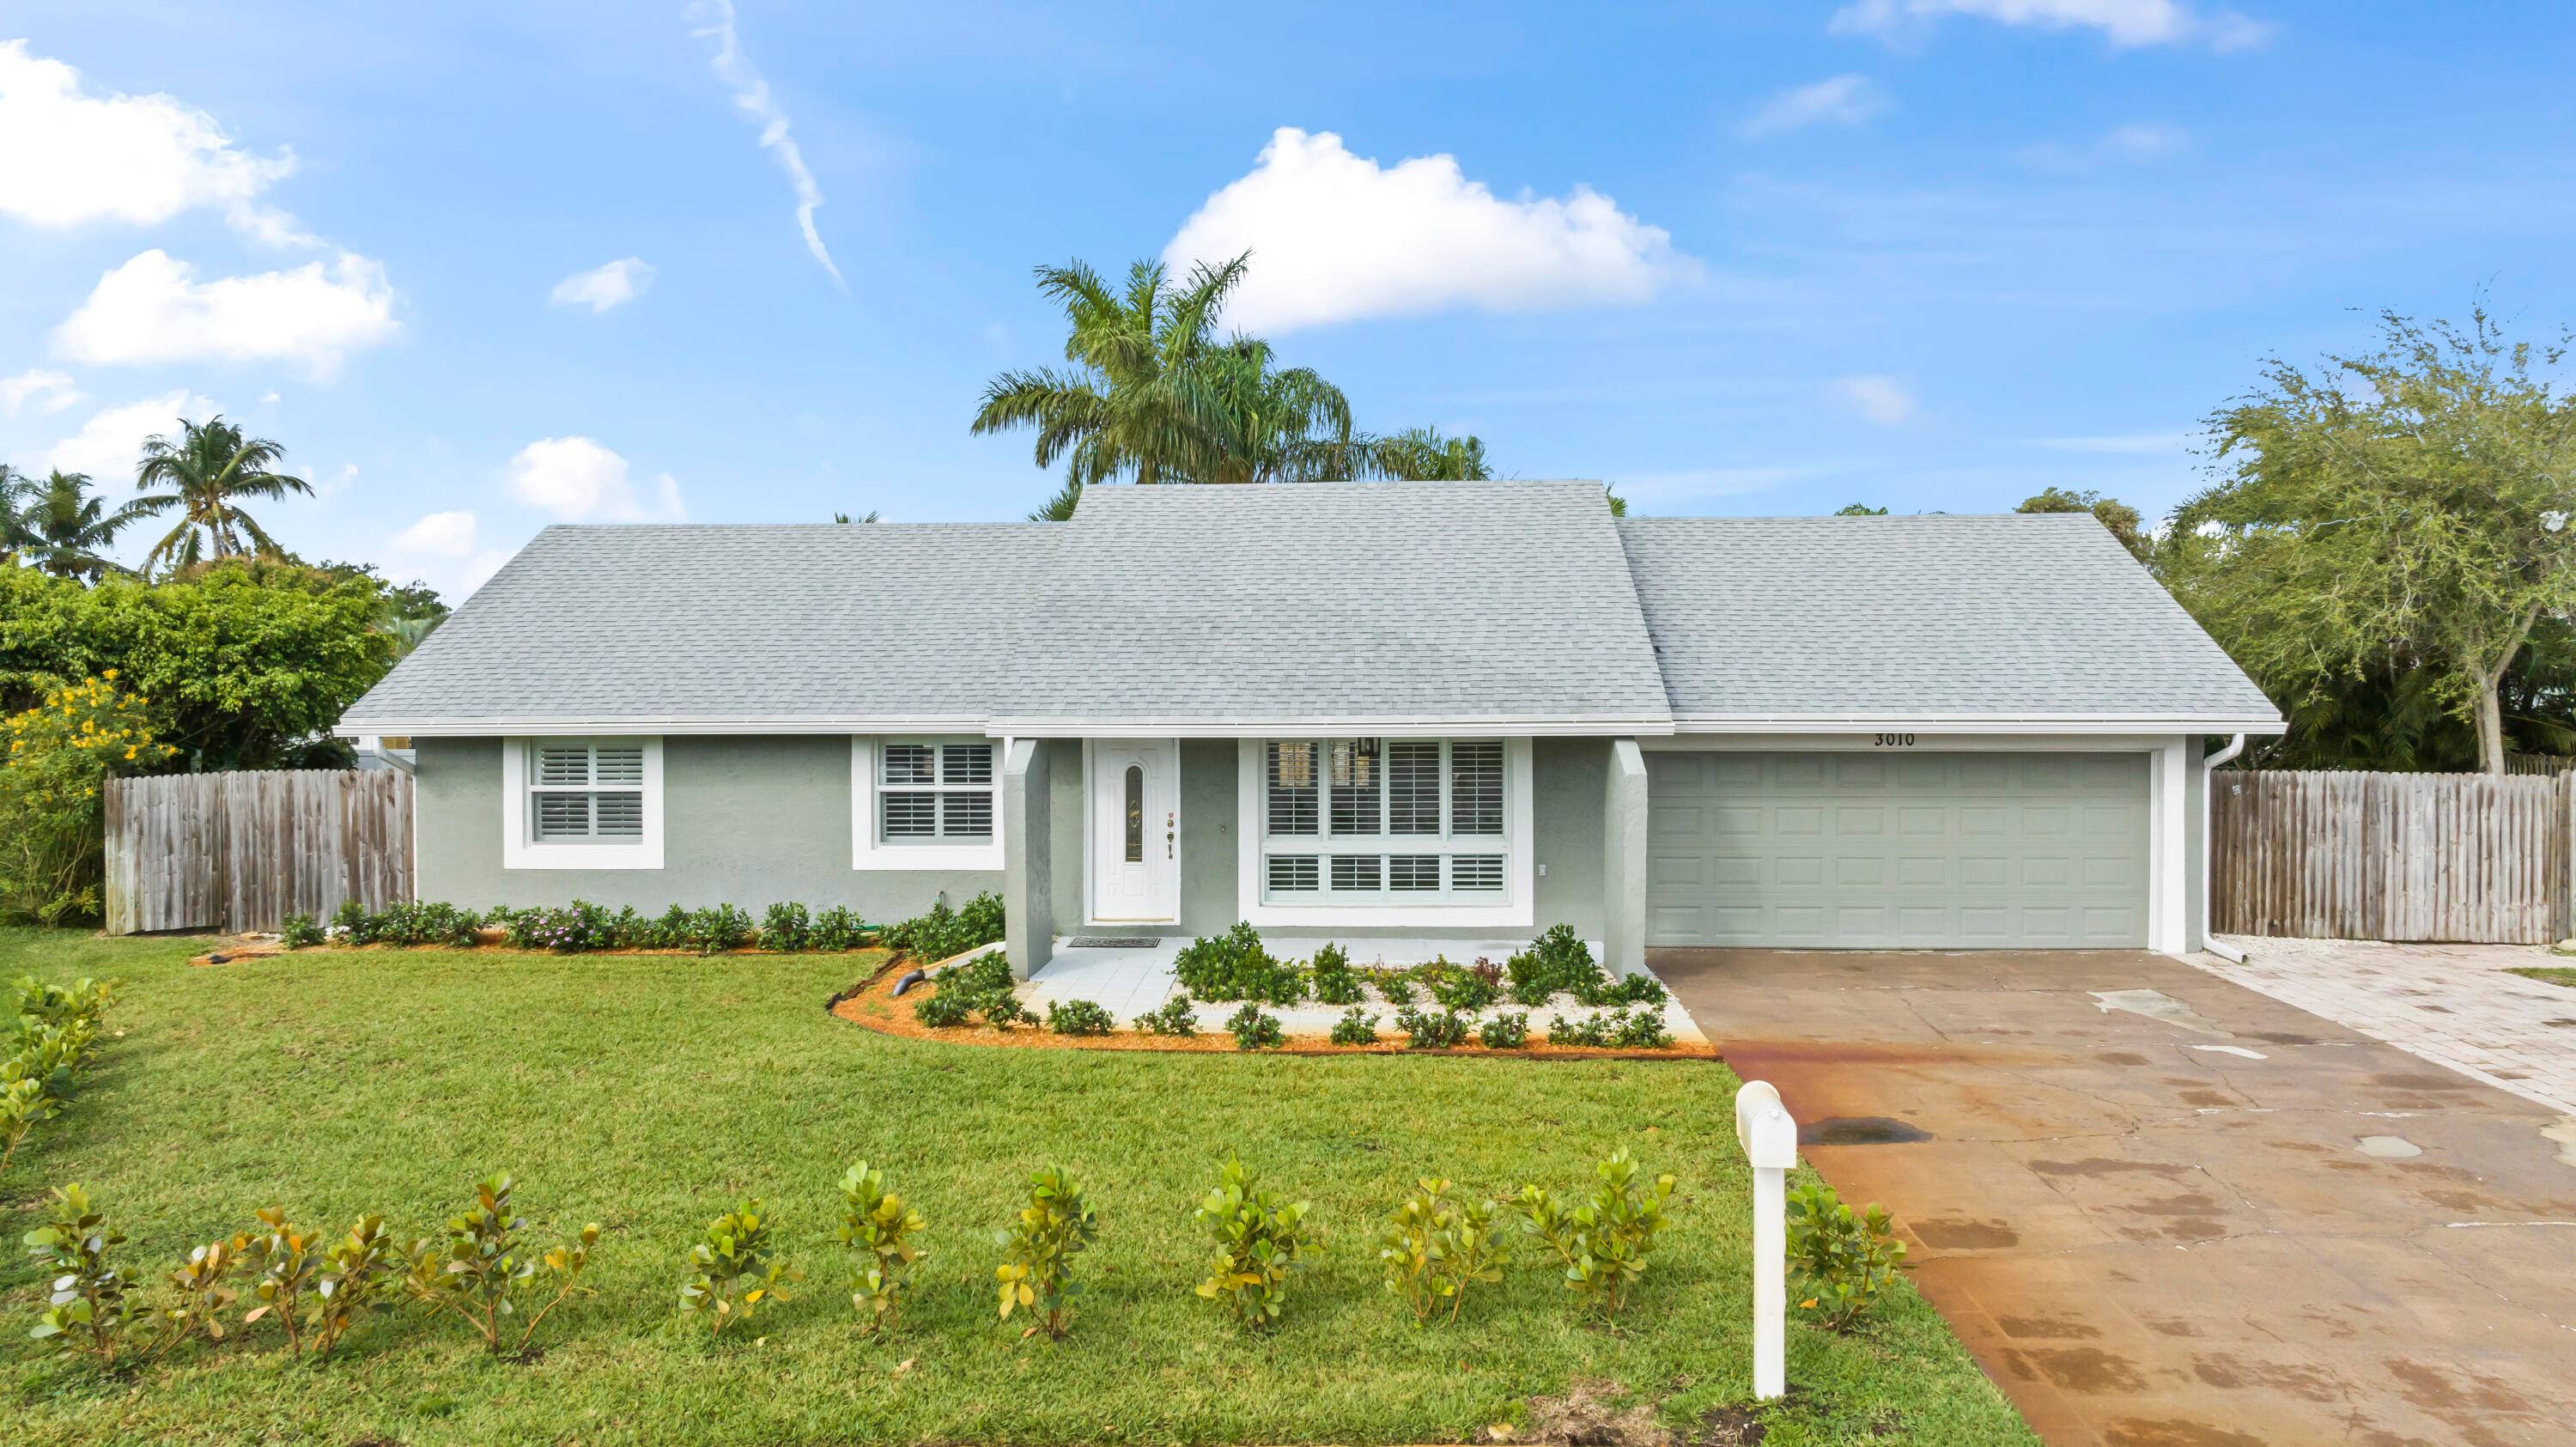 Single family home with 3 bedrooms, 2 bathrooms and 2 car garage available for annual rental in East Delray Beach !